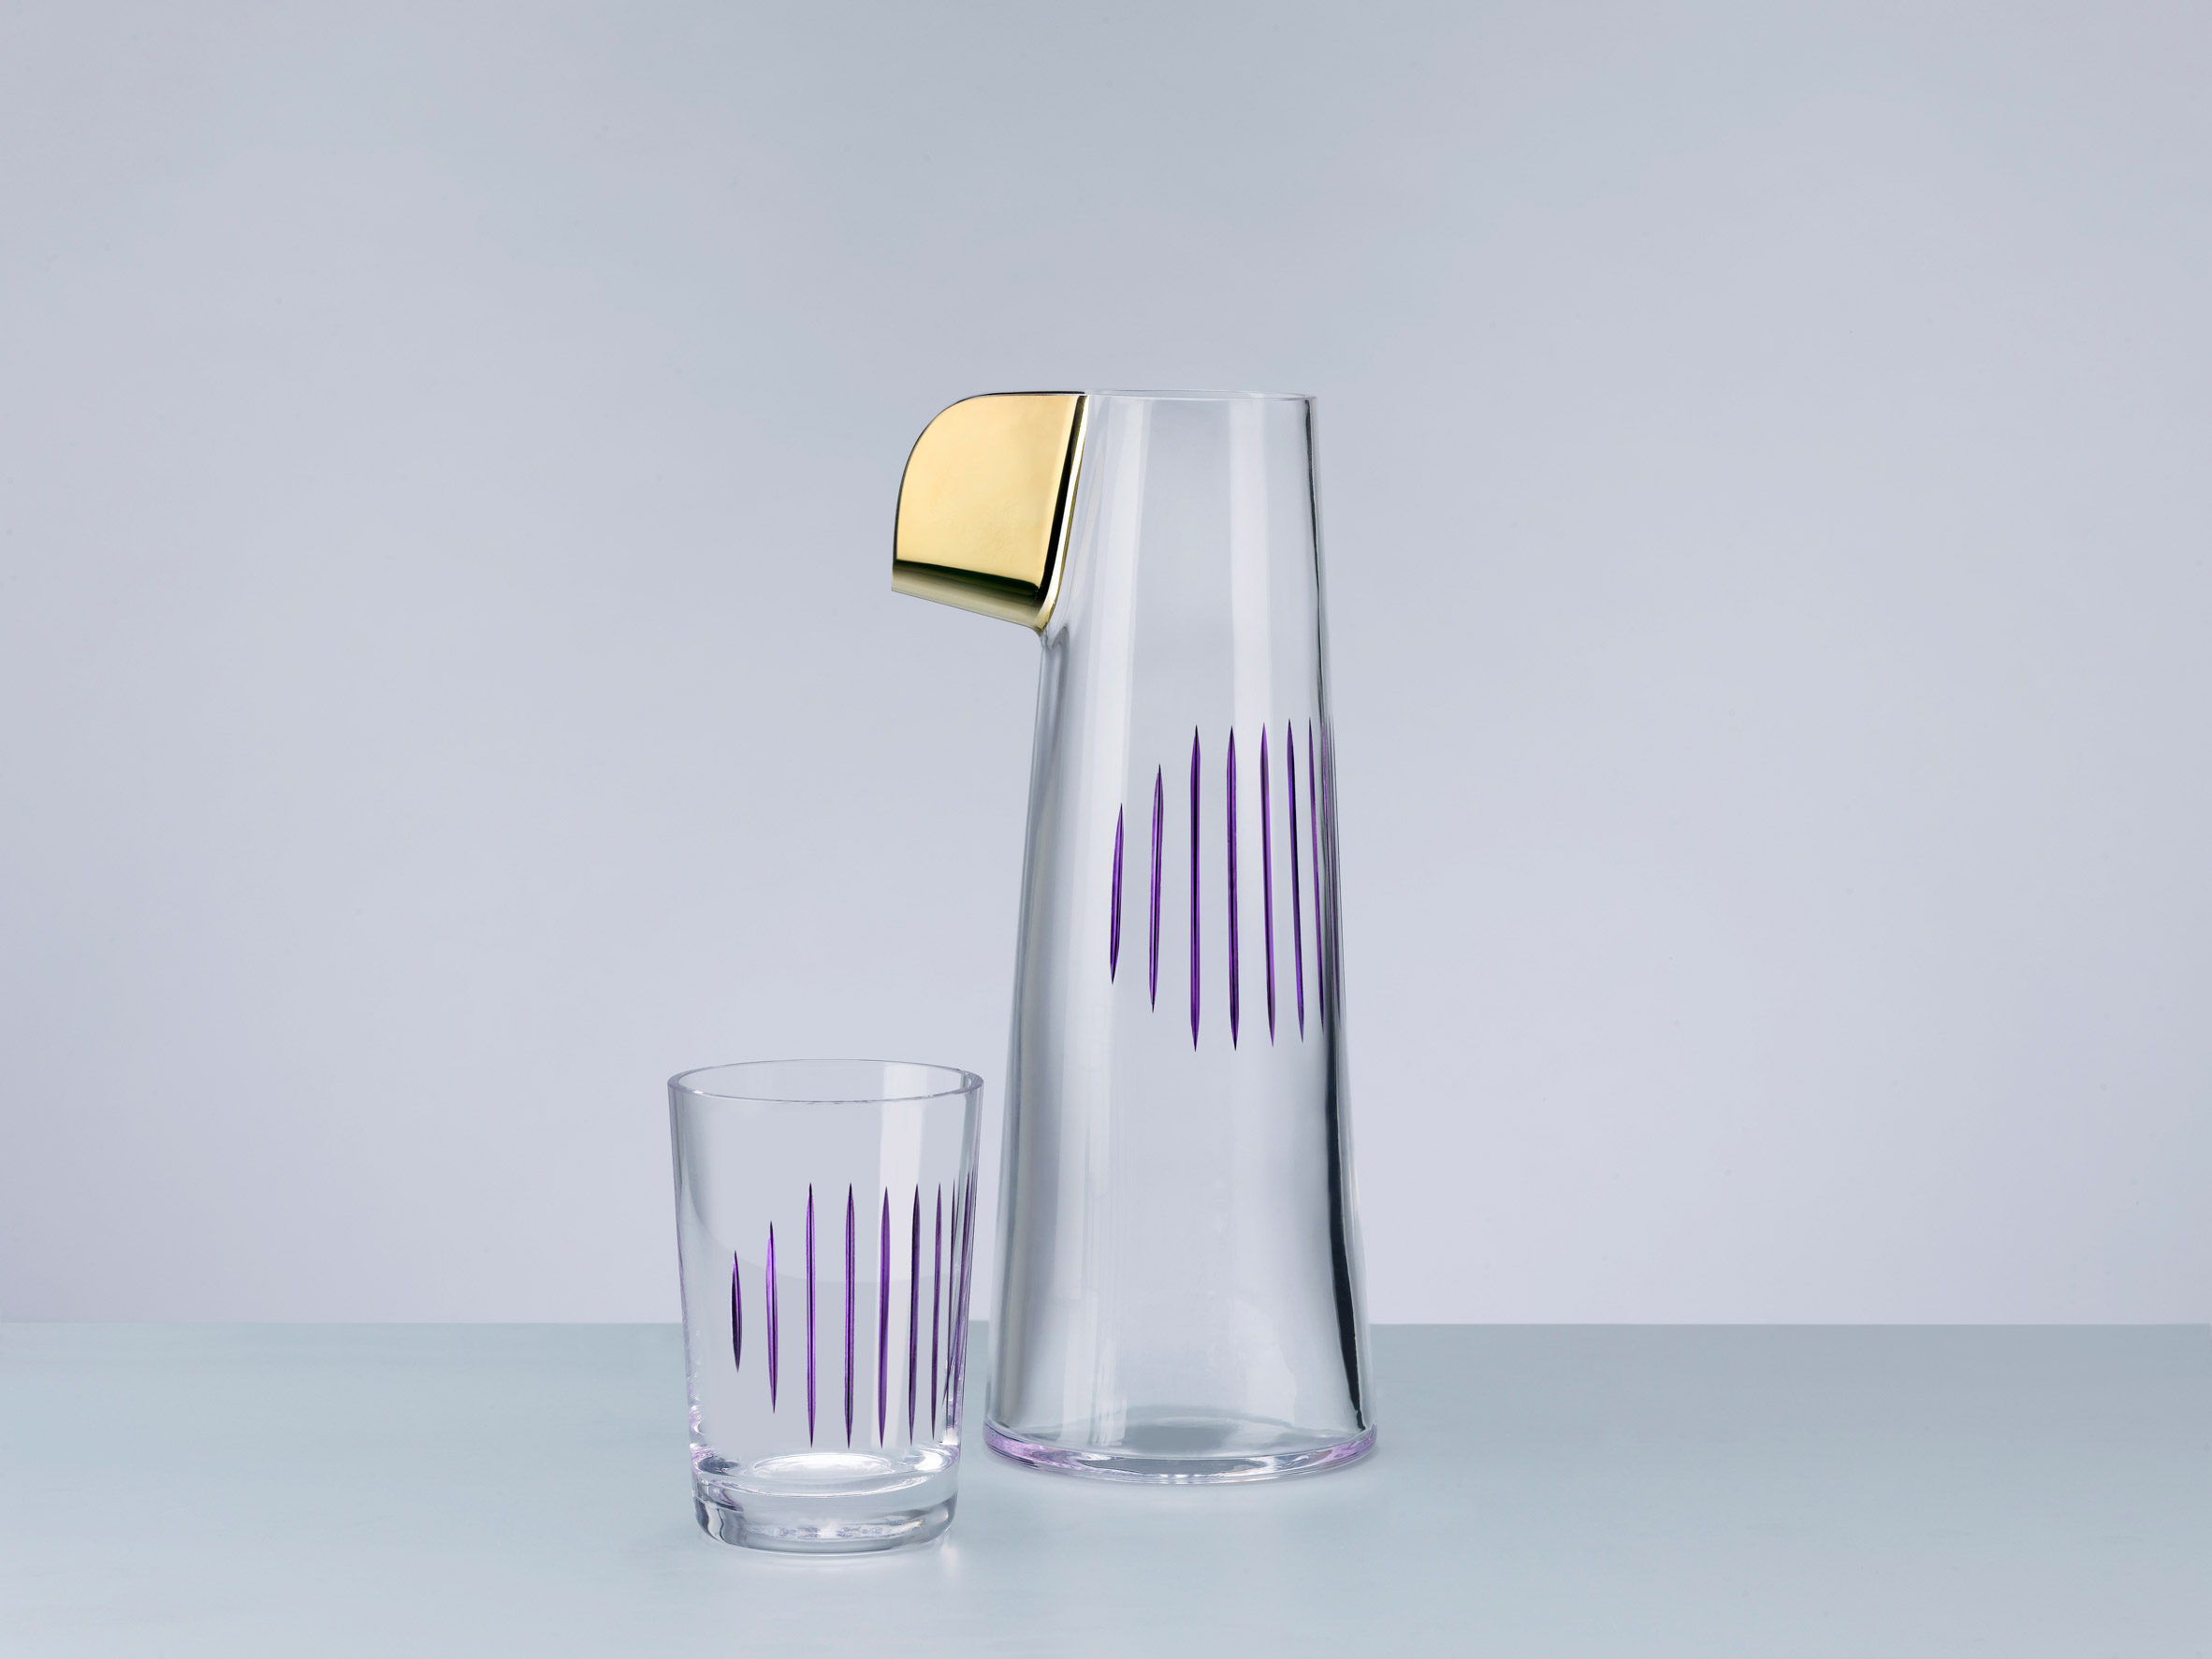 Glassware brand Nude has released a set of vases and jugs designed by Tomas Kral